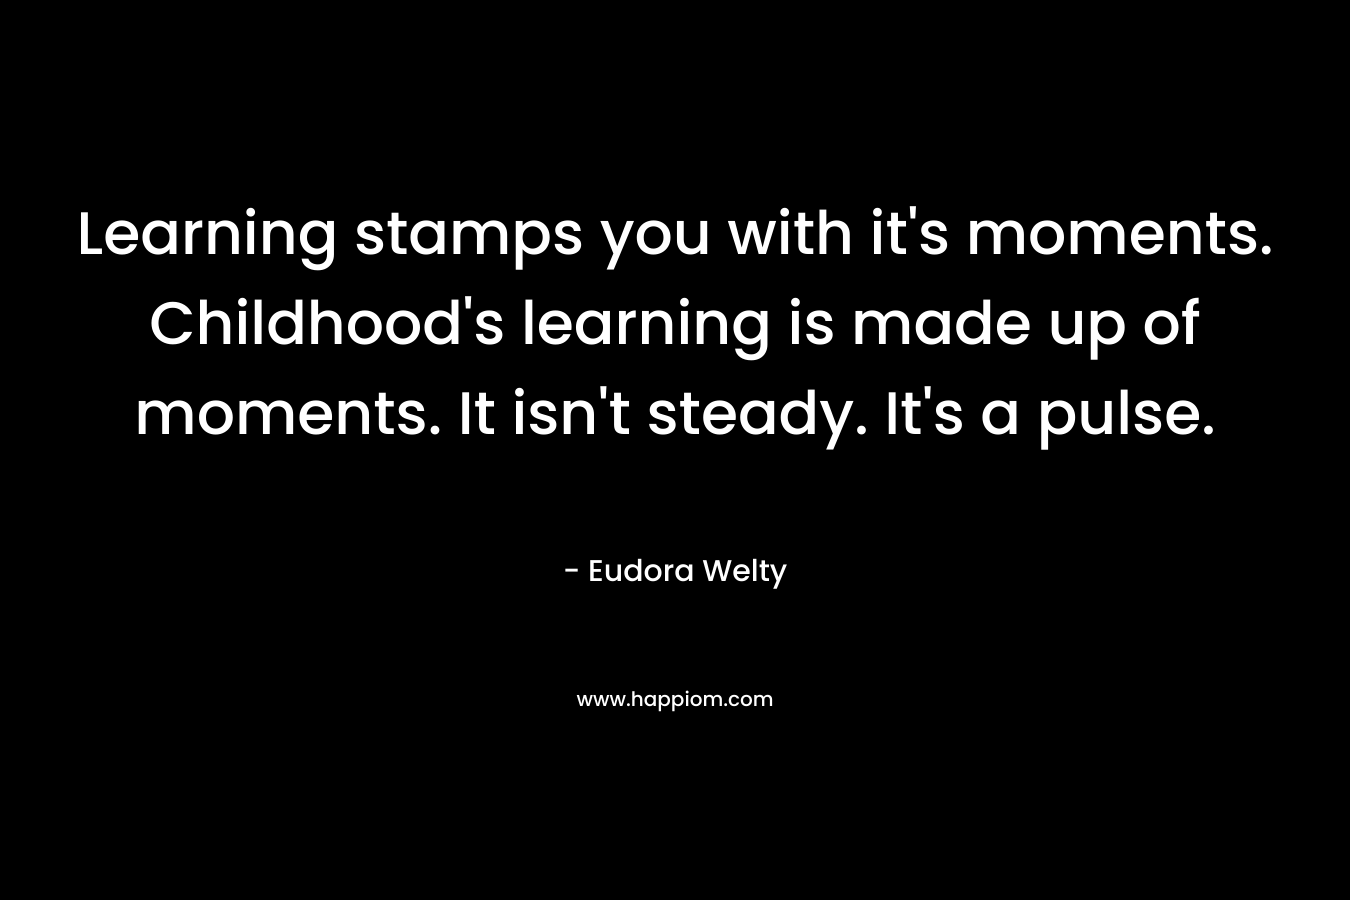 Learning stamps you with it's moments. Childhood's learning is made up of moments. It isn't steady. It's a pulse.